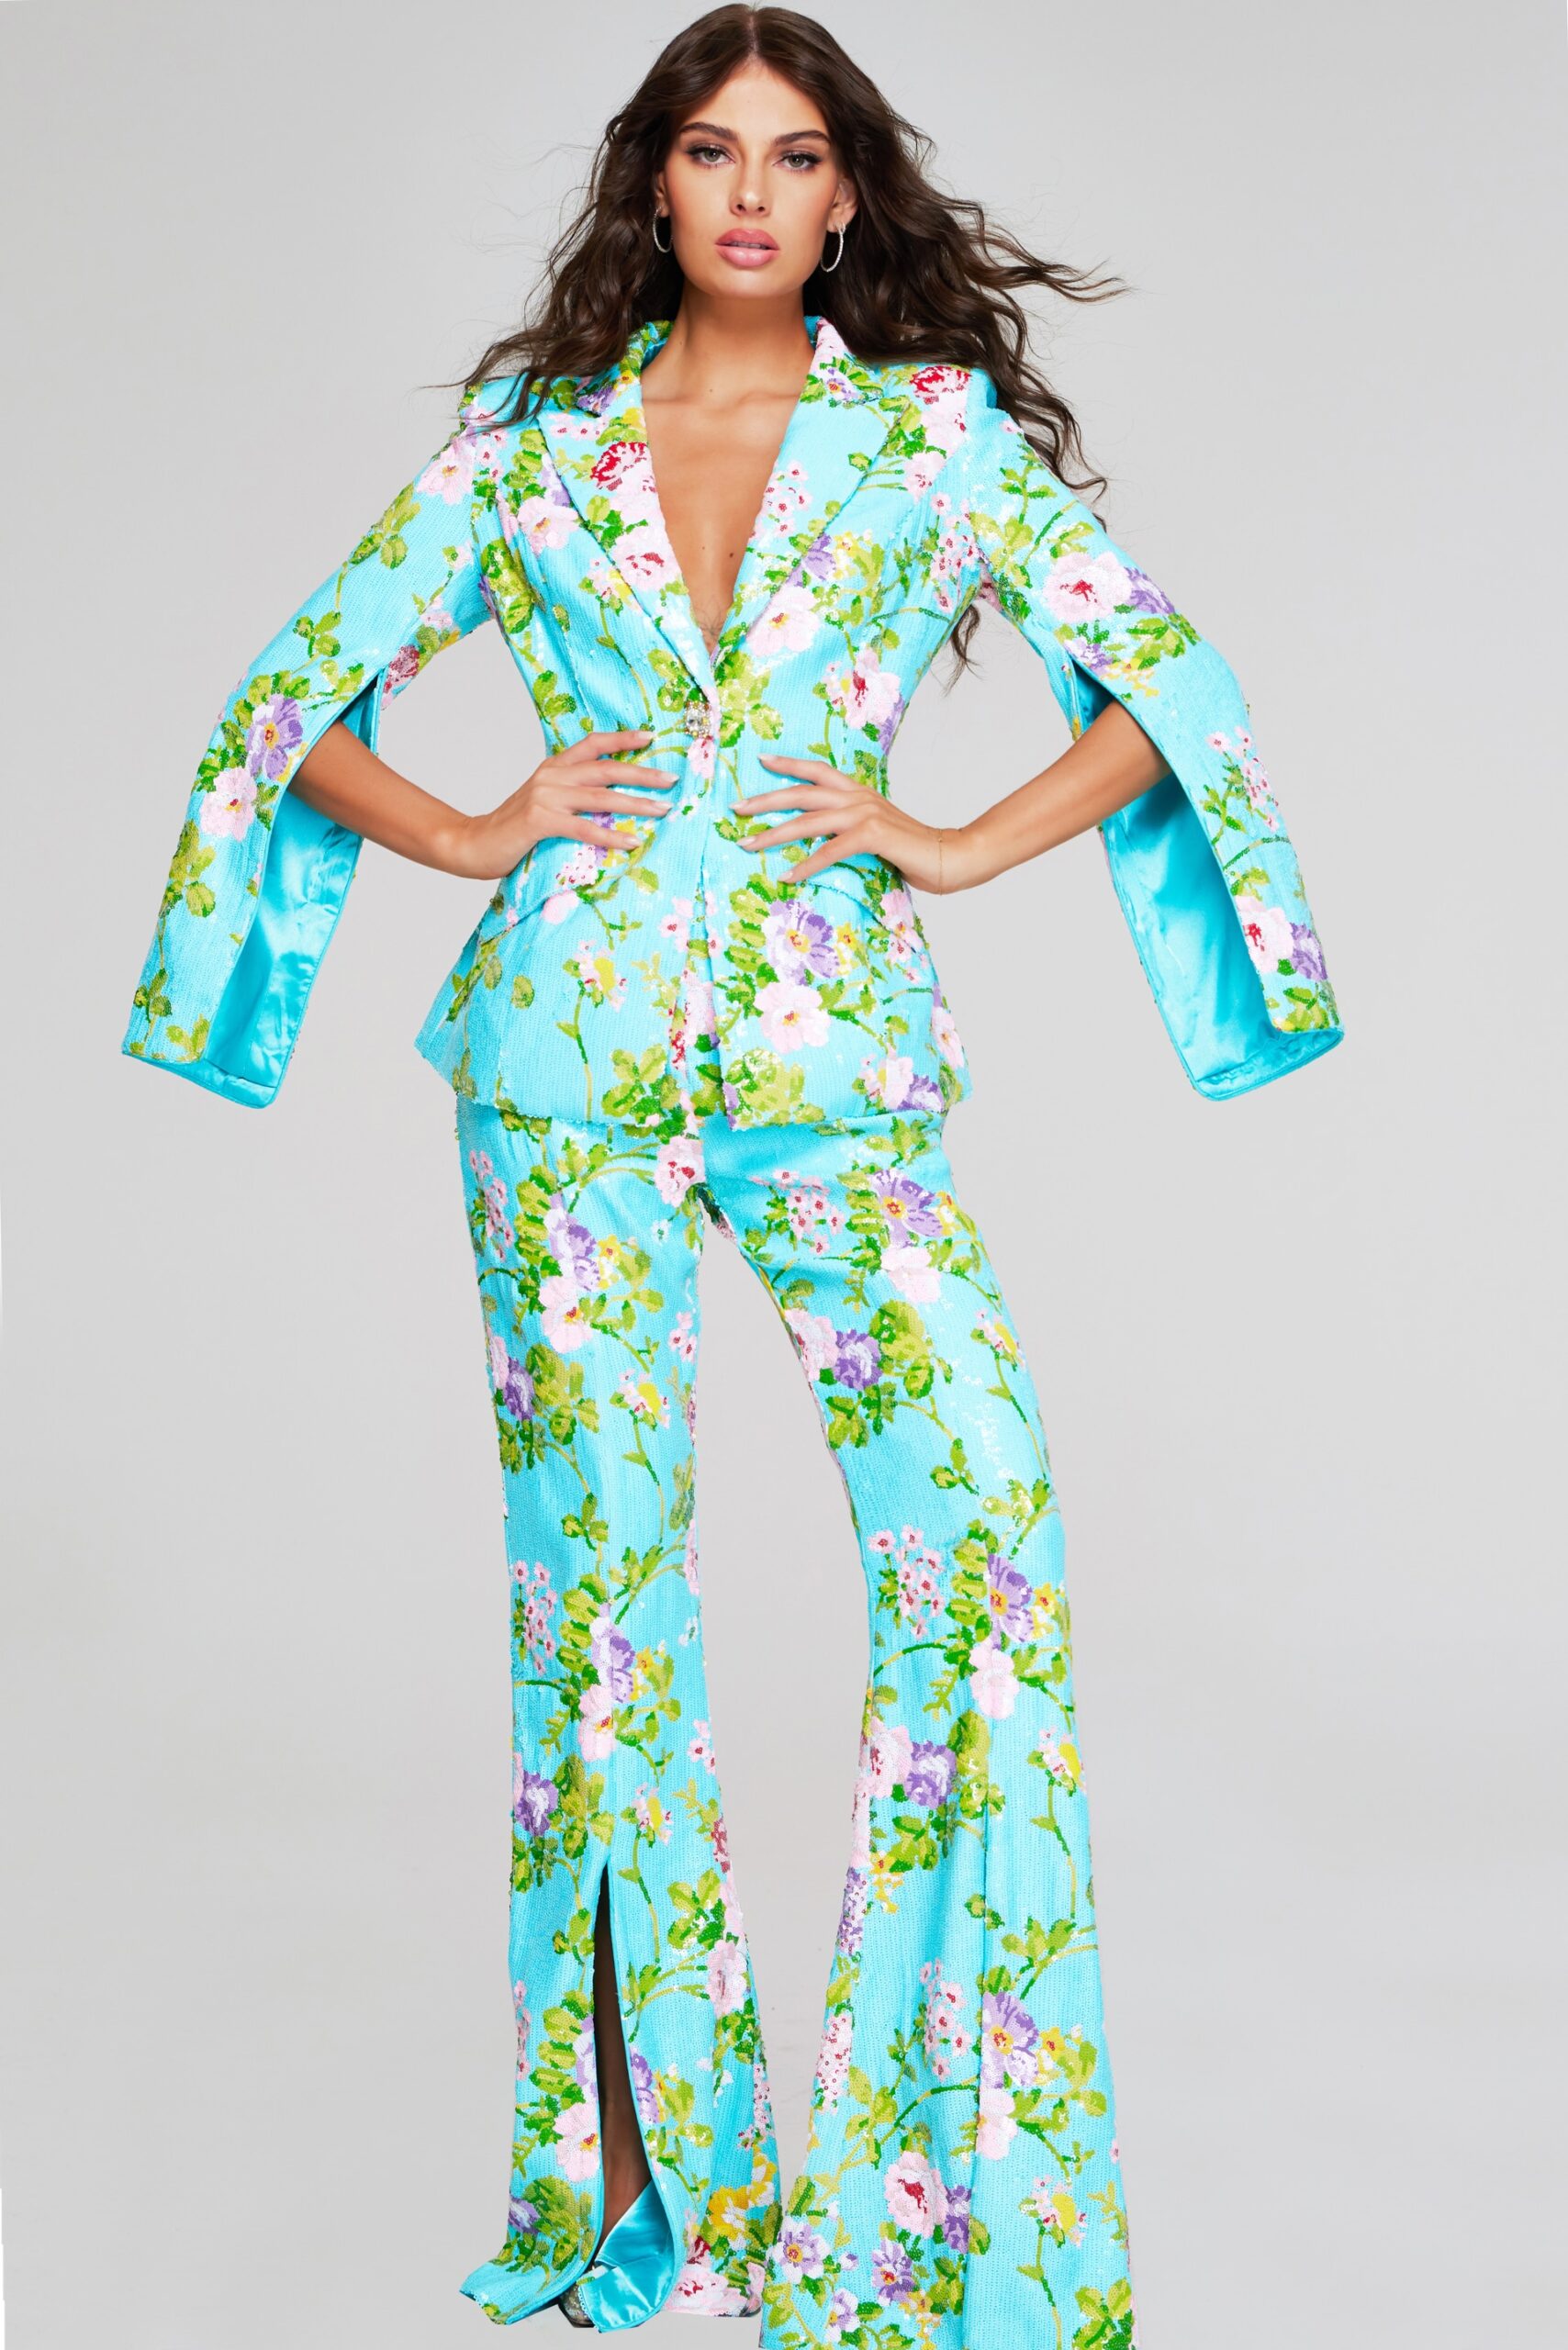 Model wearing Vibrant Floral Print Bell Sleeve Pant Suit 42146